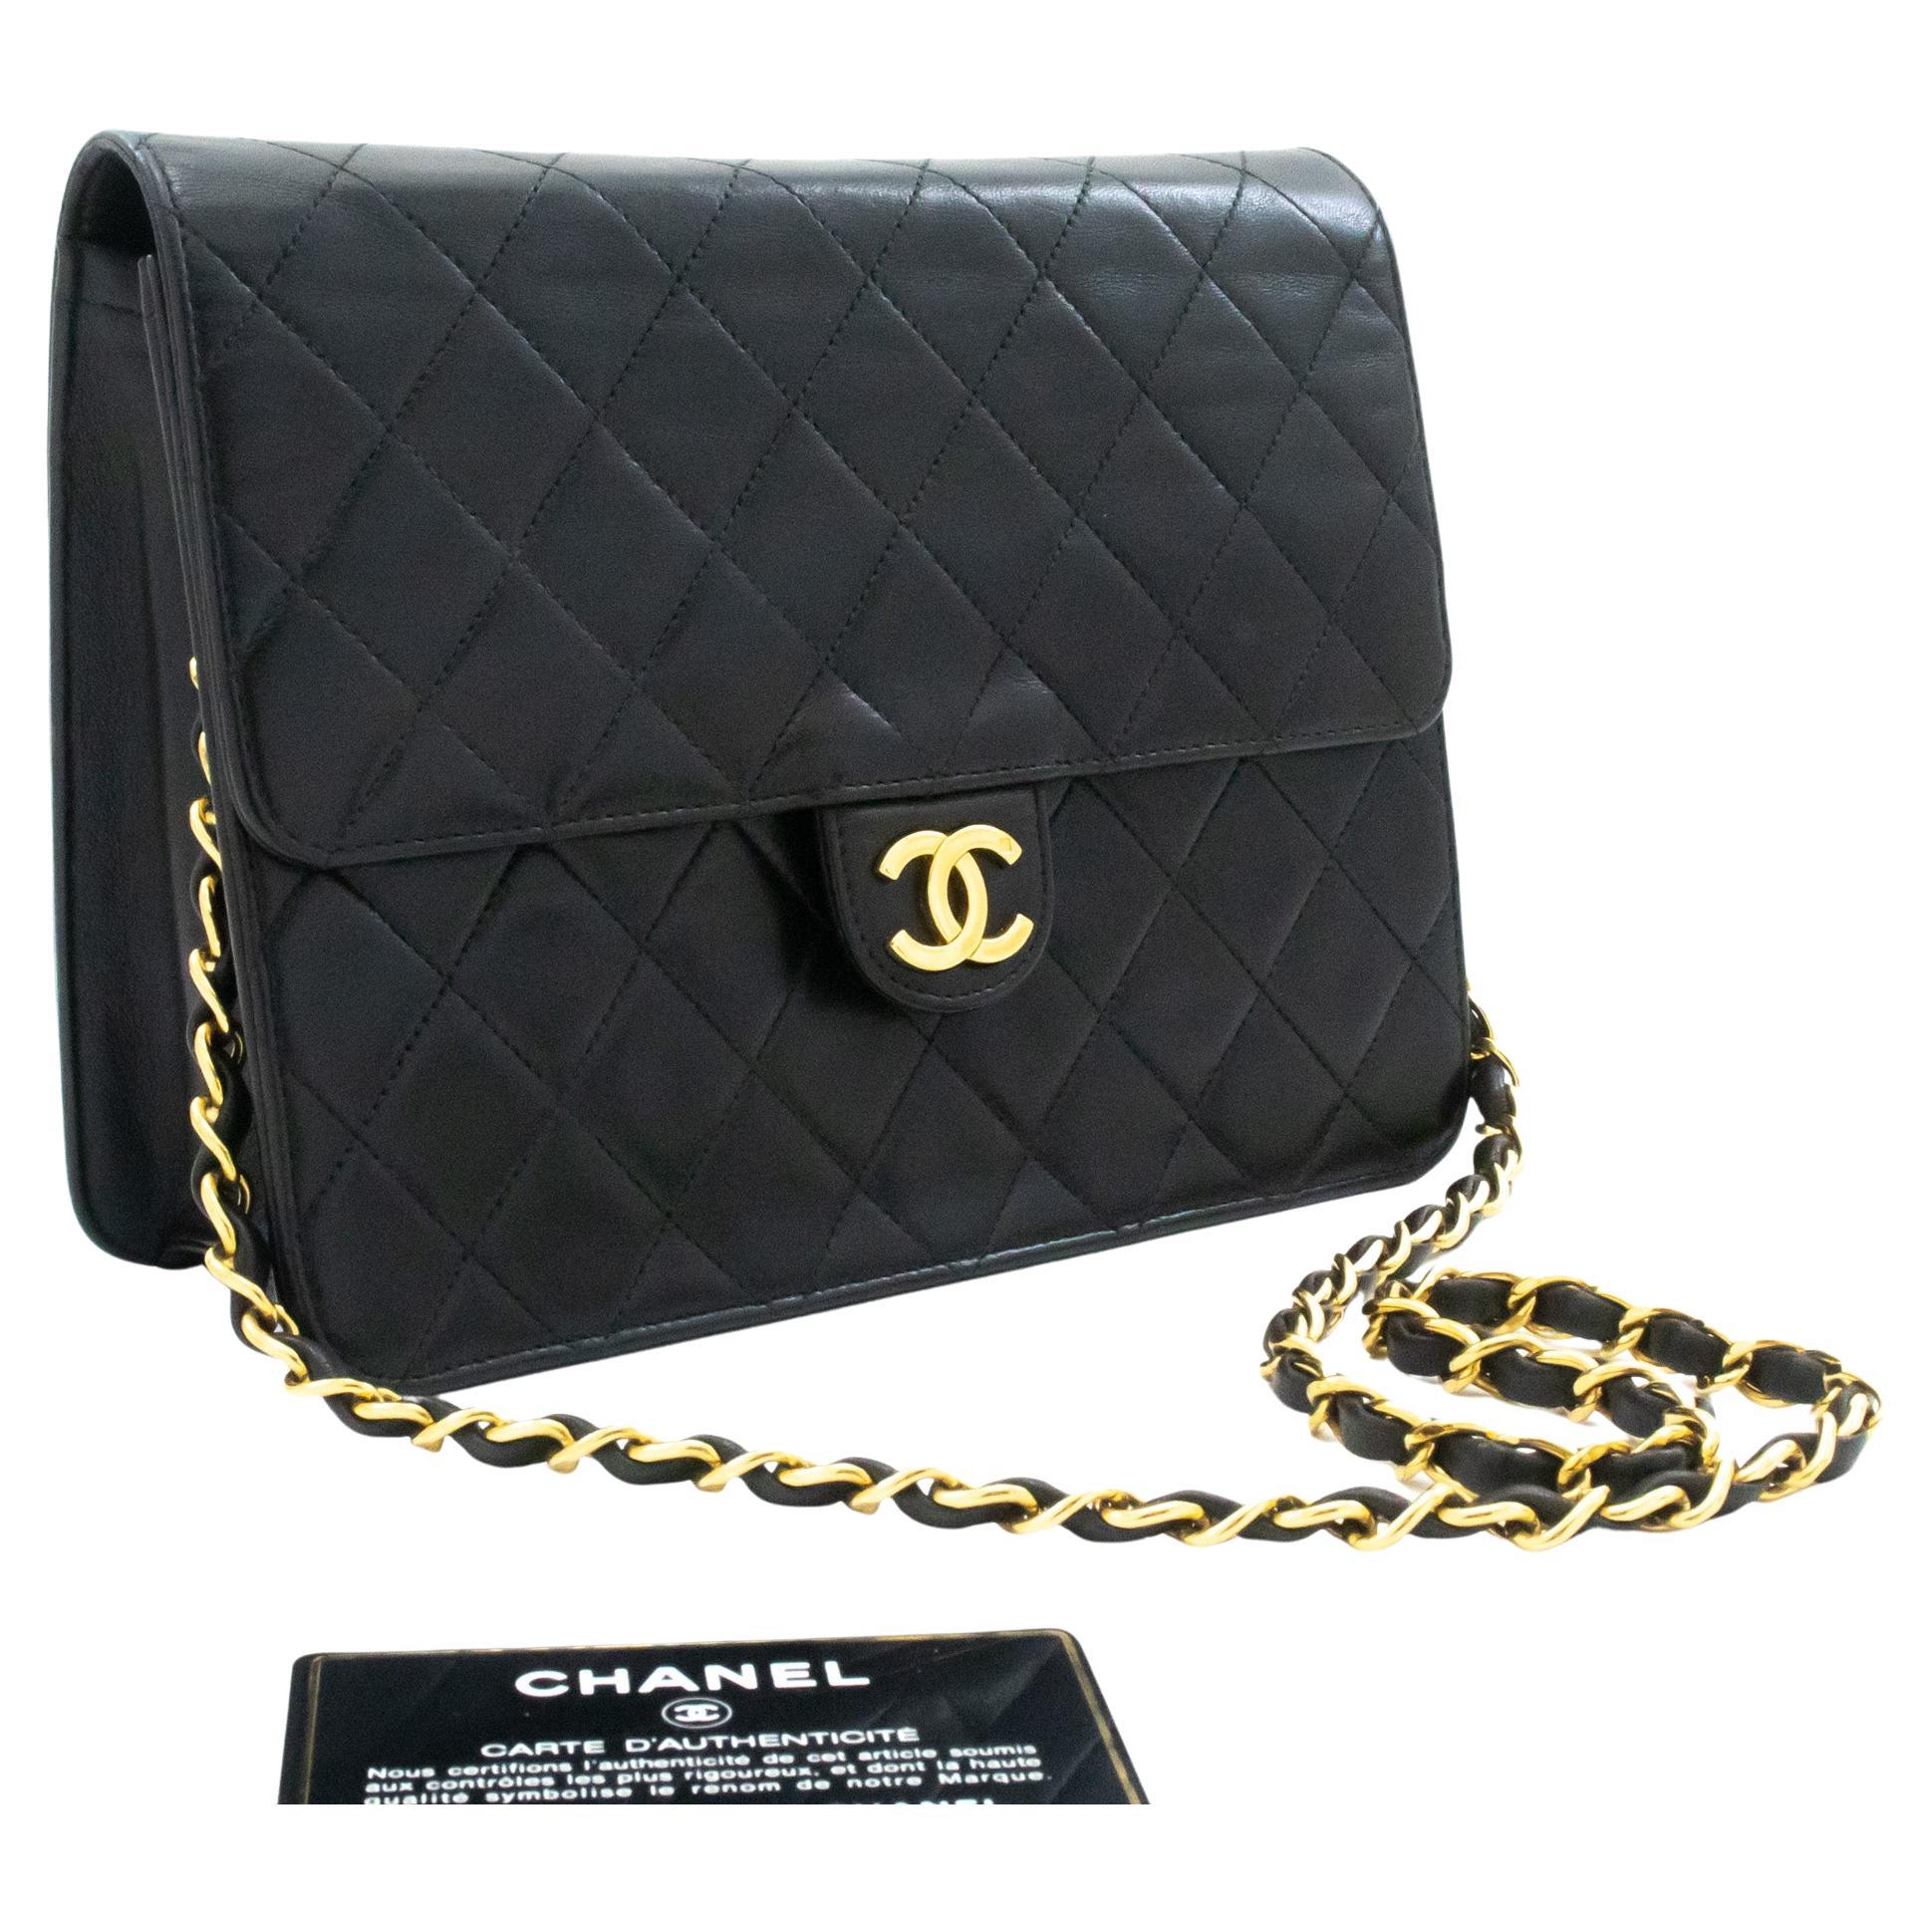 Chanel Small Chain Shoulder Bag Black Clutch Flap Quilted Lambskin